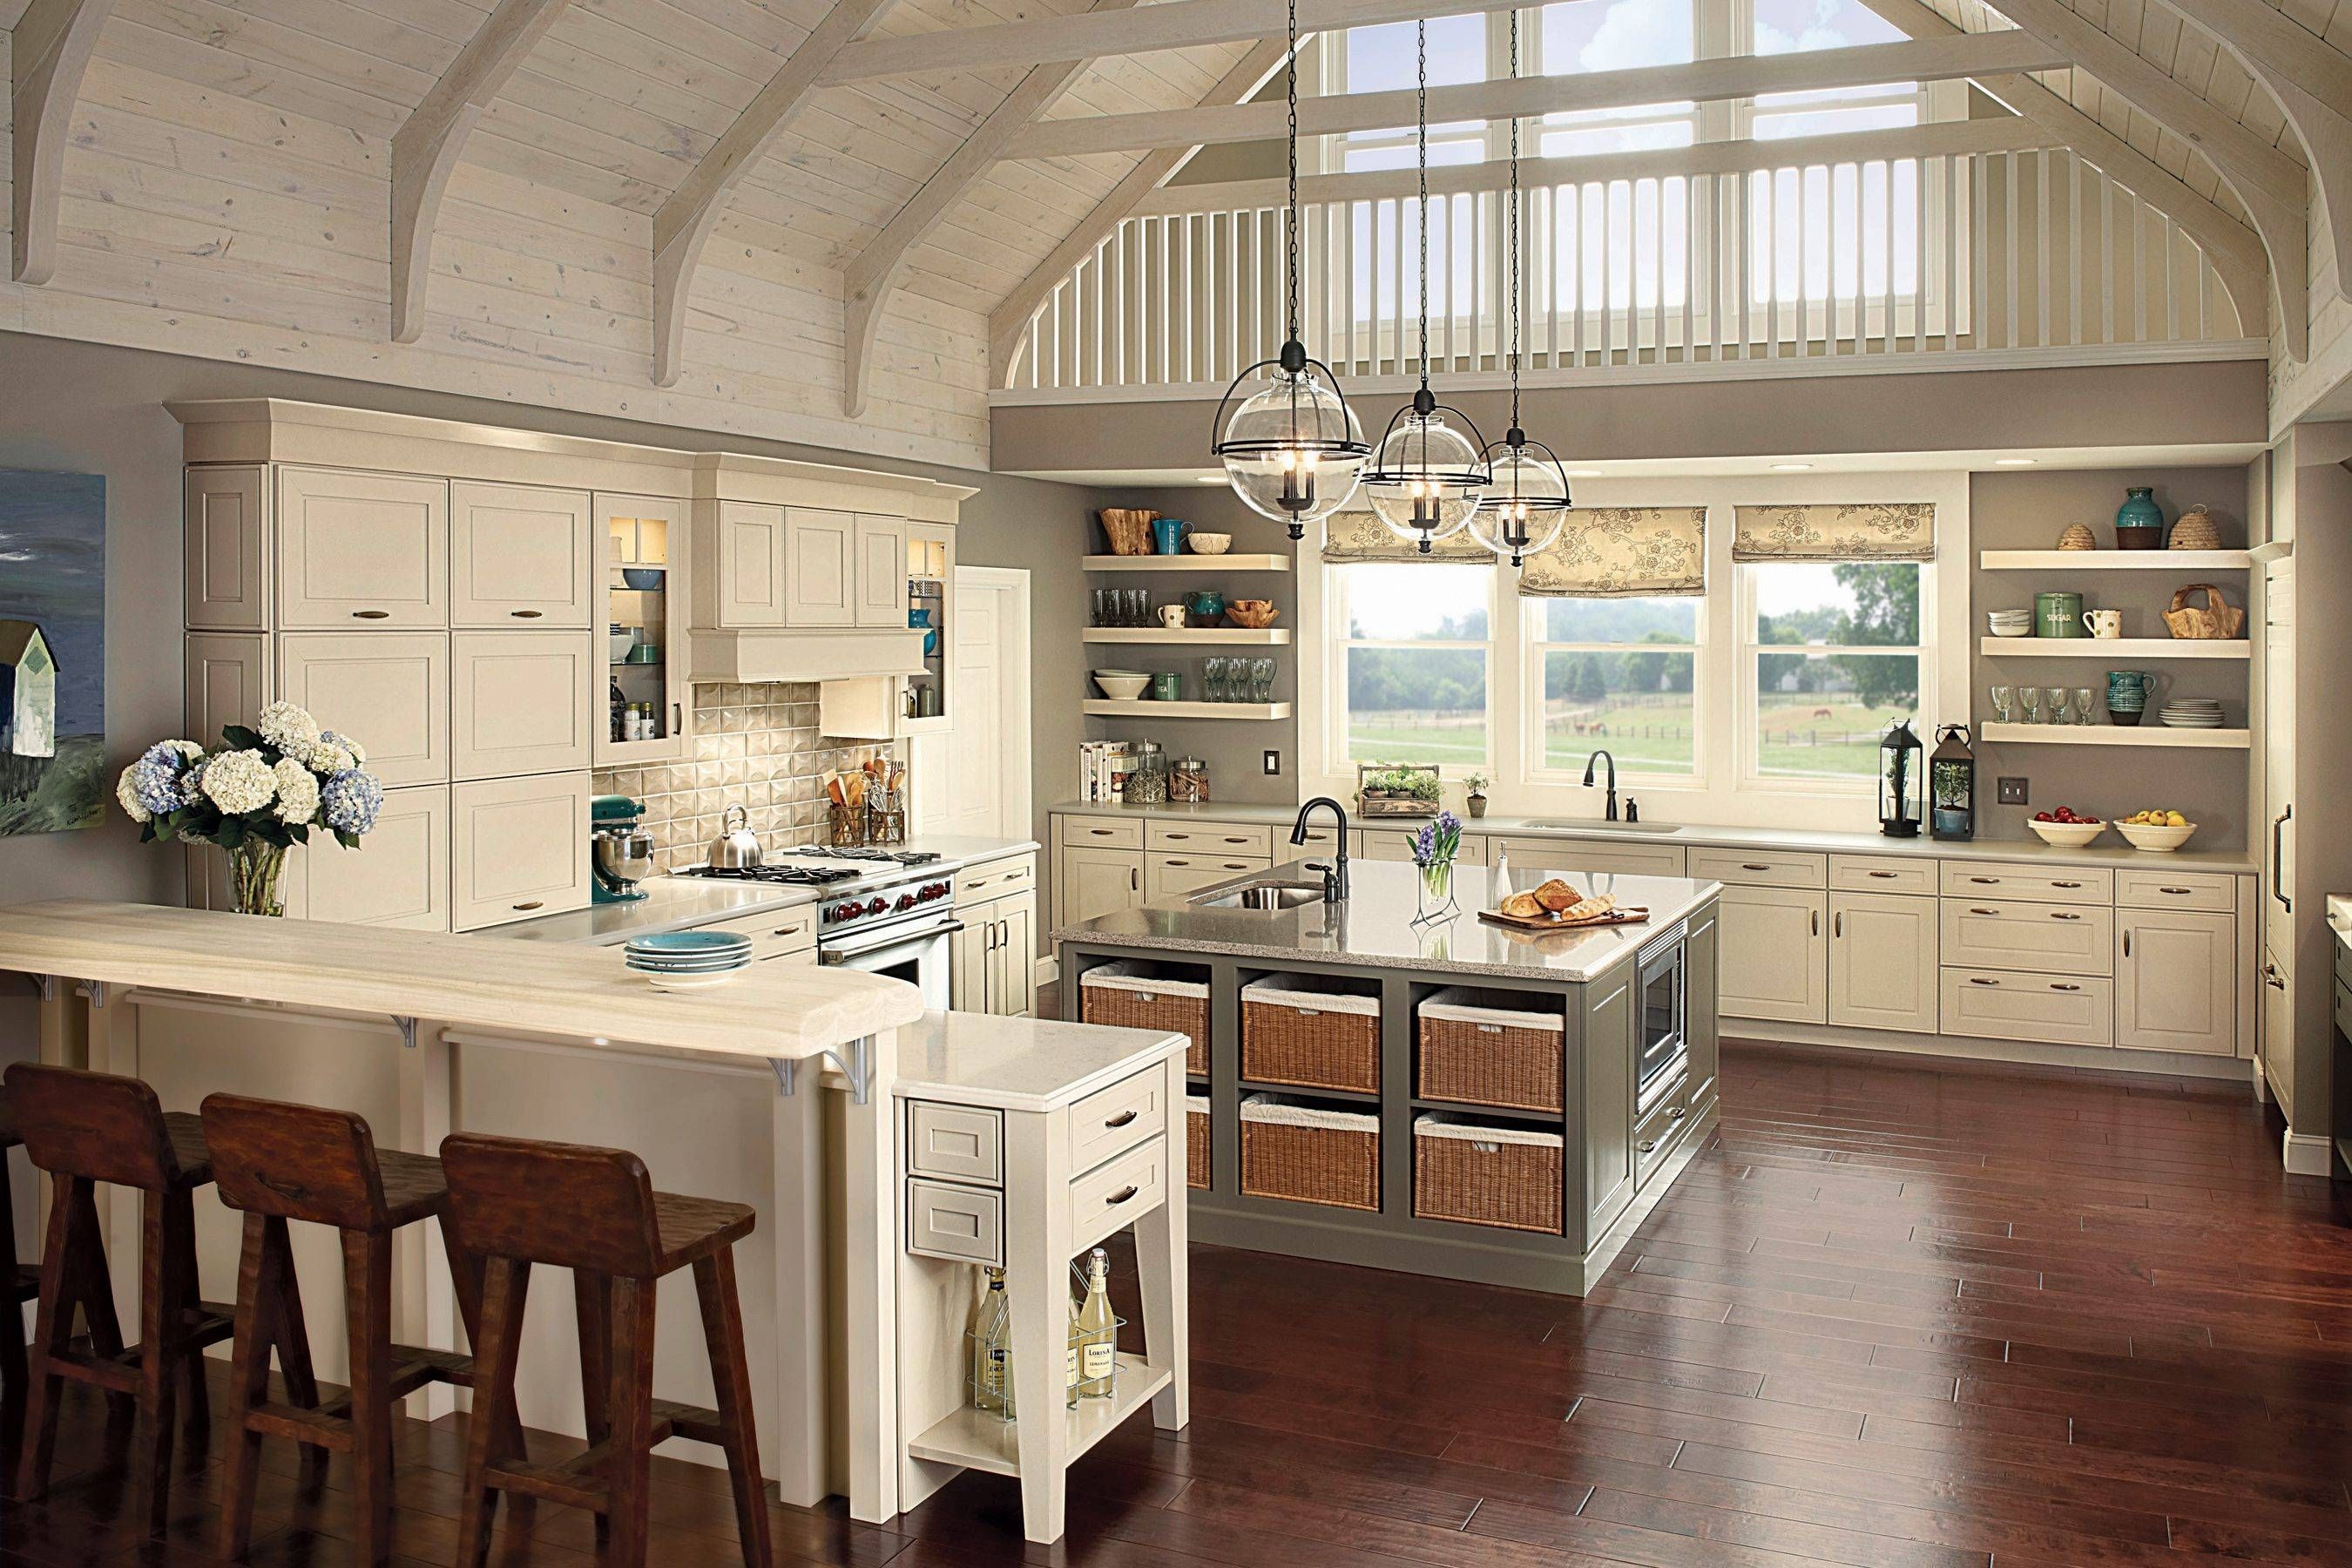 Overhelming Cupola Kitchen Concept With High Ceiling And Fancy Within Pendant Lighting For High Ceilings (View 13 of 15)